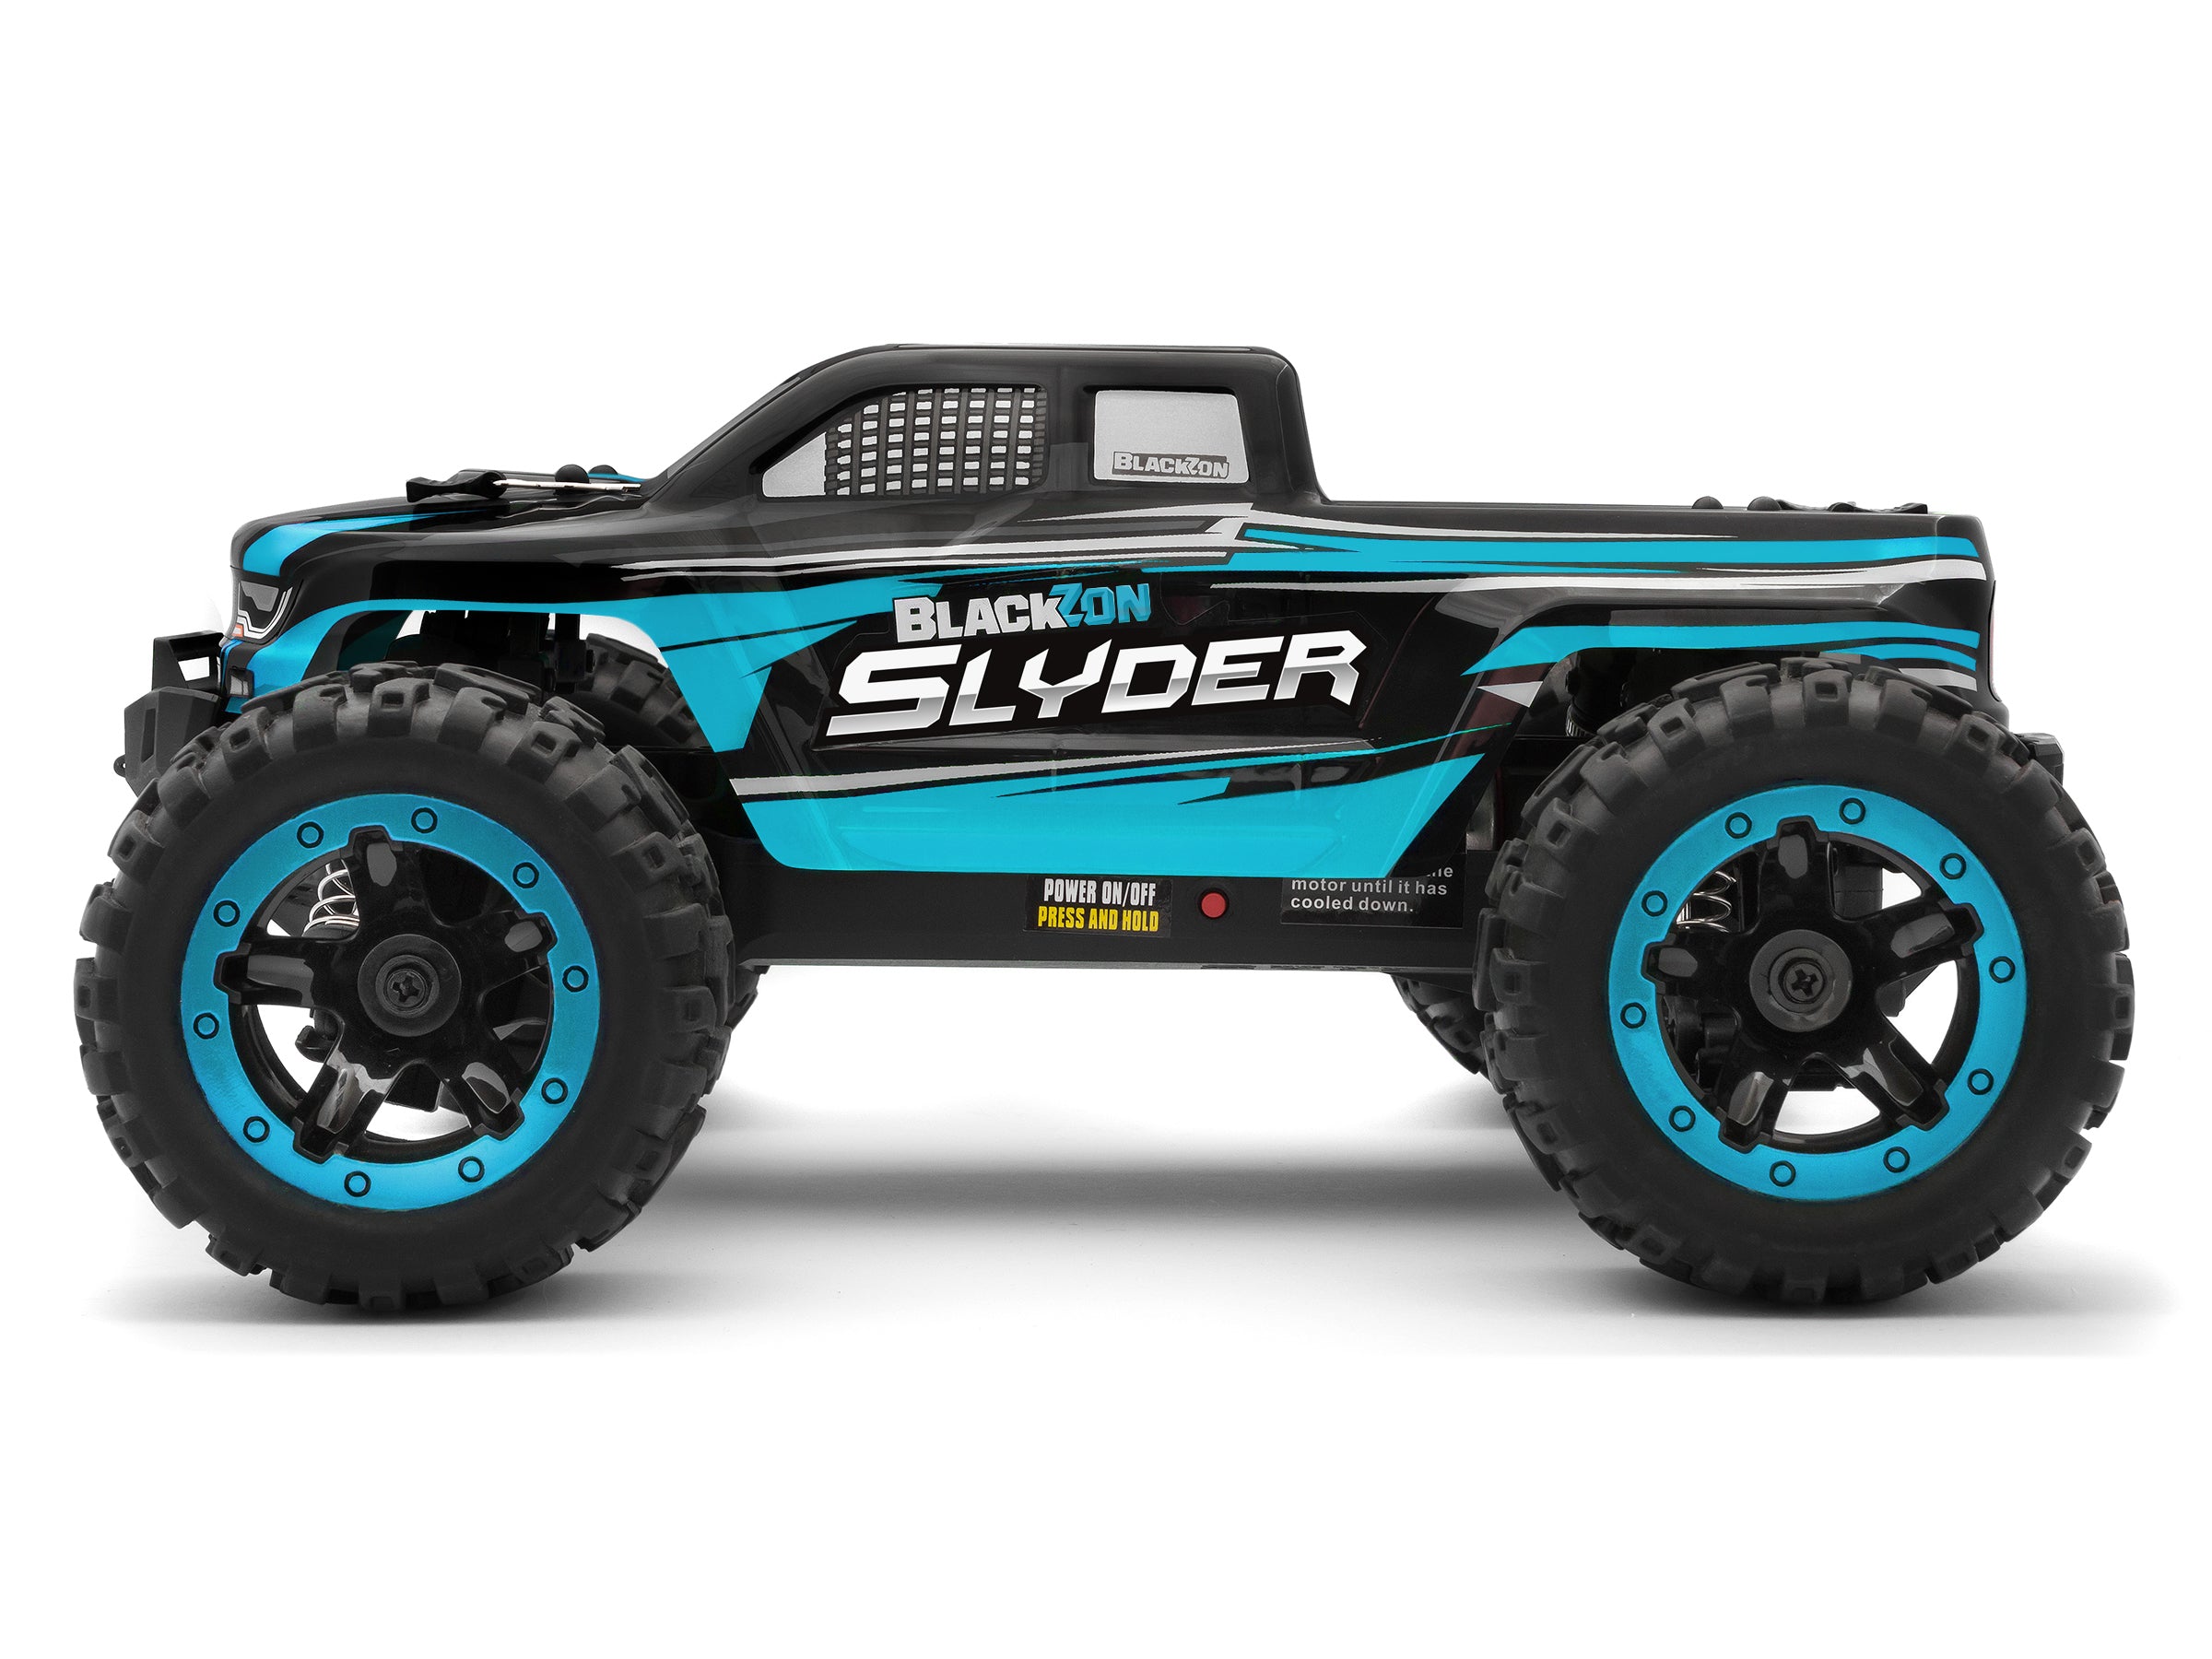 BlackZon Slyder 1/16th RTR 4WD Electric Monster Truck Blue